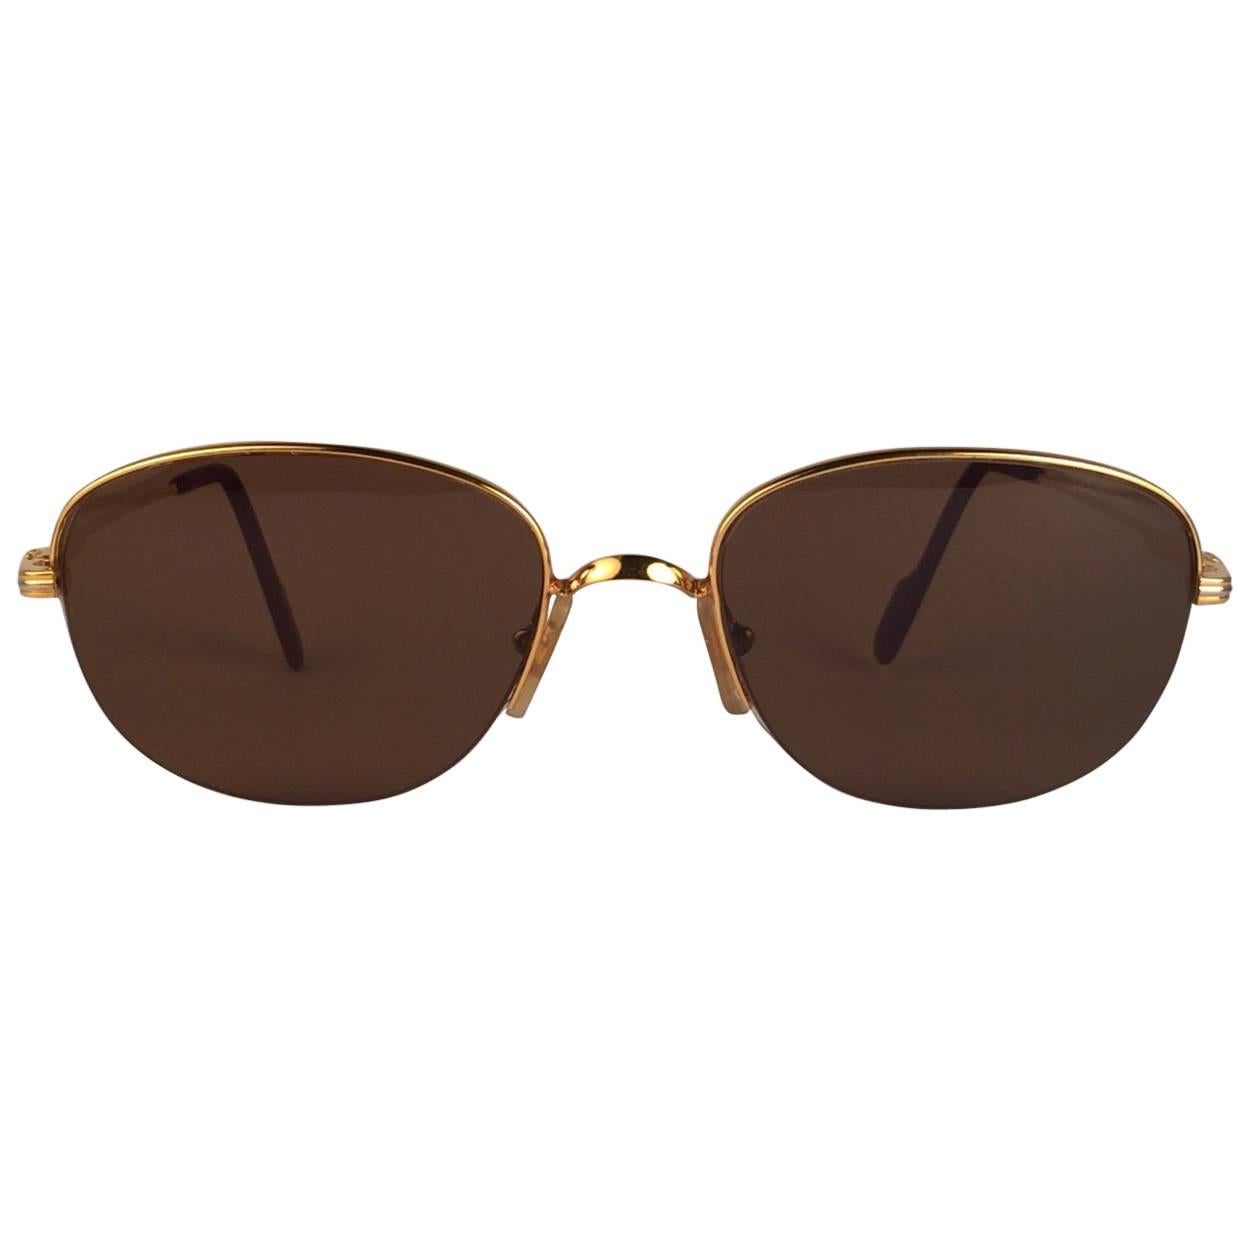 New 1983 Cartier Montaigne Vendome sunglasses with brown (uv protection) lenses. Frame is with the front and sides in yellow and white gold. All hallmarks. Cartier gold signs on the earpaddles. These are like a pair of jewels on your nose with the